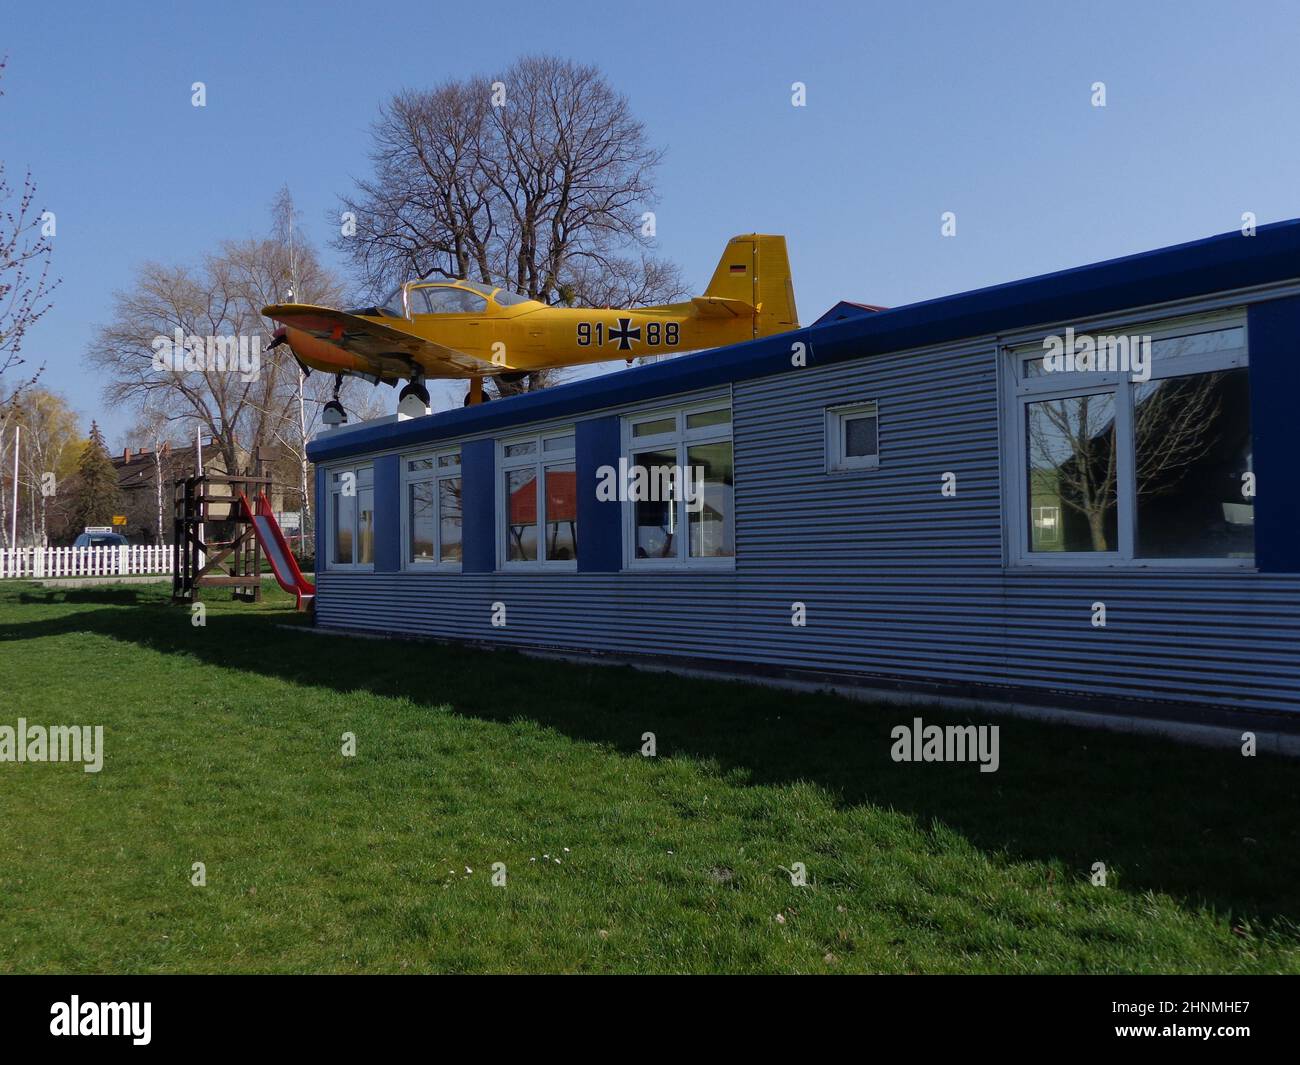 EDCB Ballenstedt airfield functional building with aircraft on the roof Stock Photo